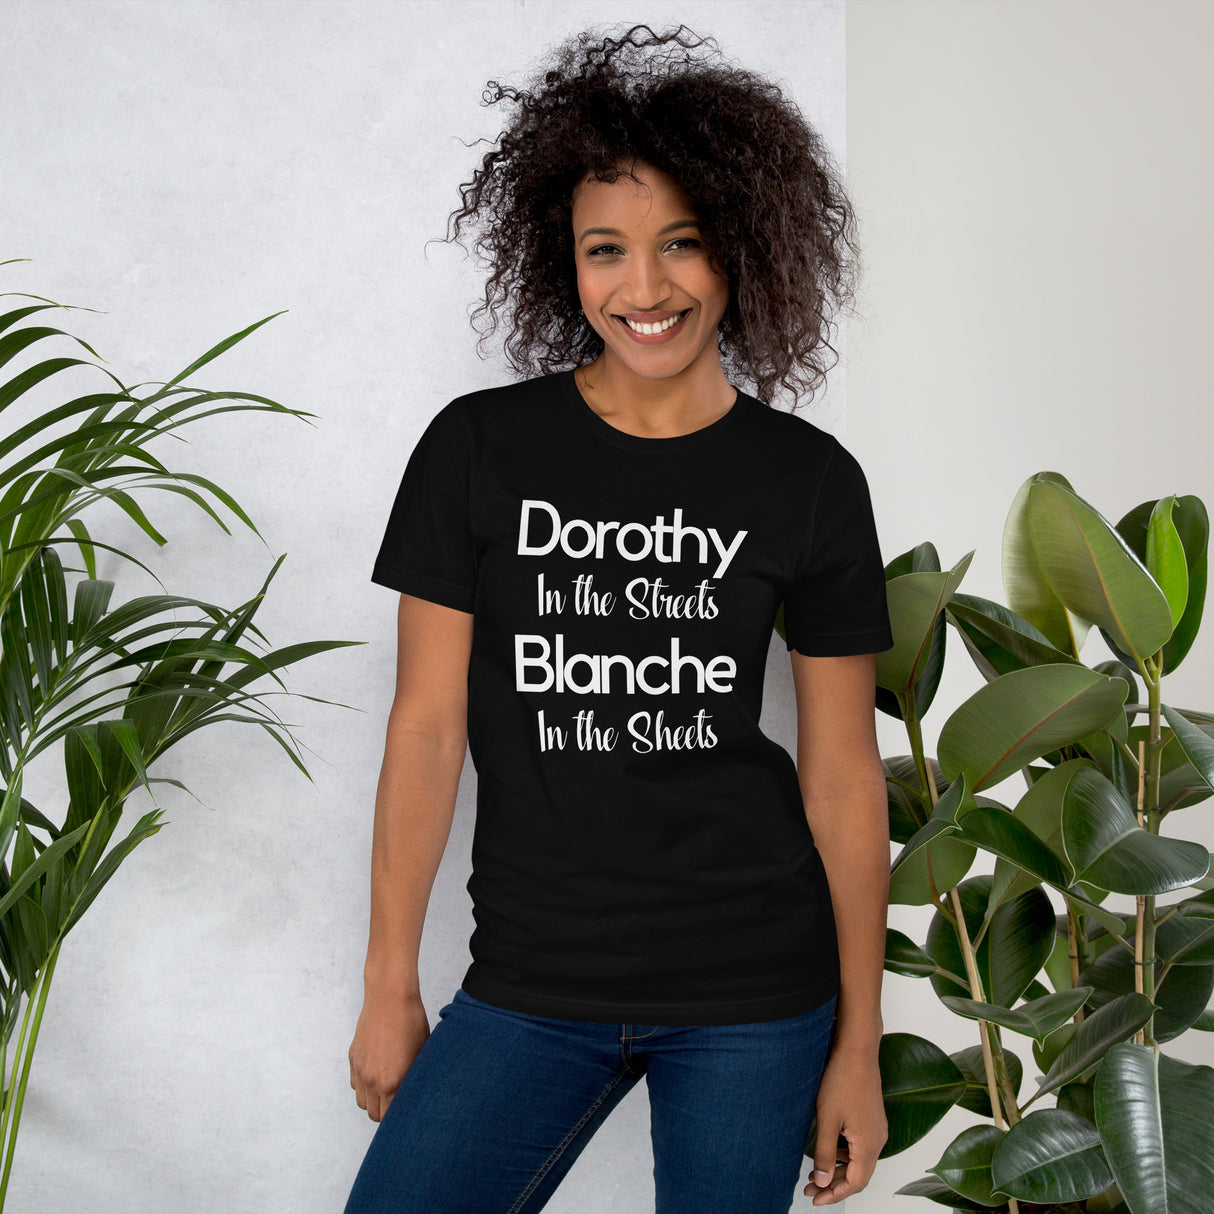 Dorothy In The Streets Blanche In The Sheets Women's Shirt